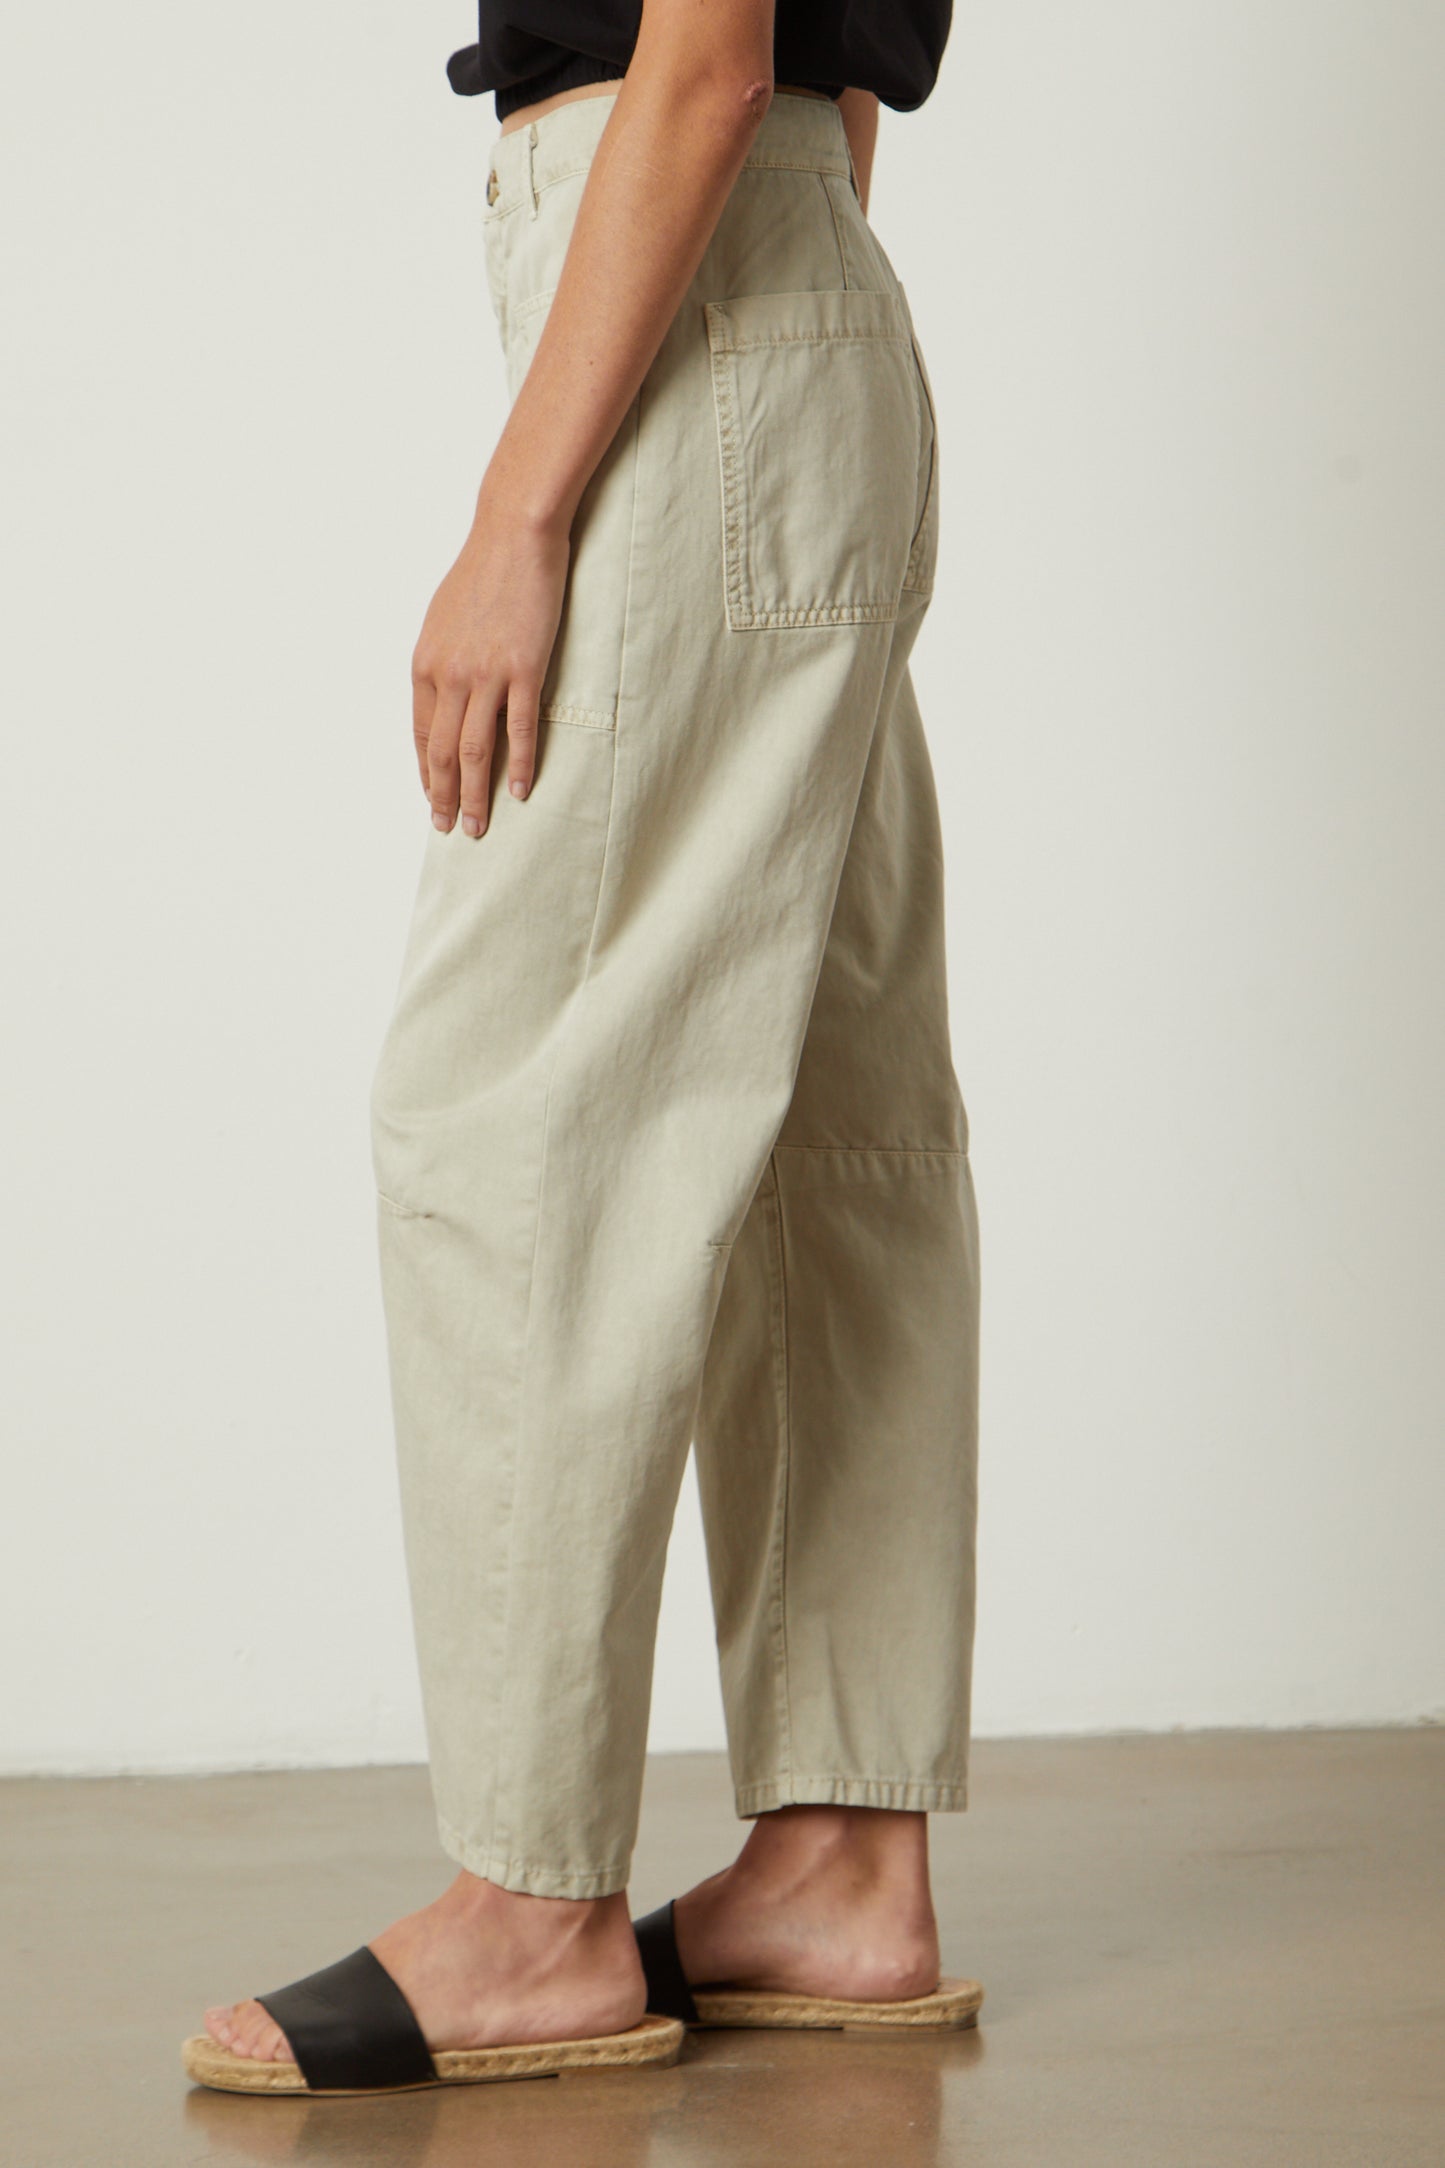 BRYLIE SANDED TWILL PANT IN ANCIENT